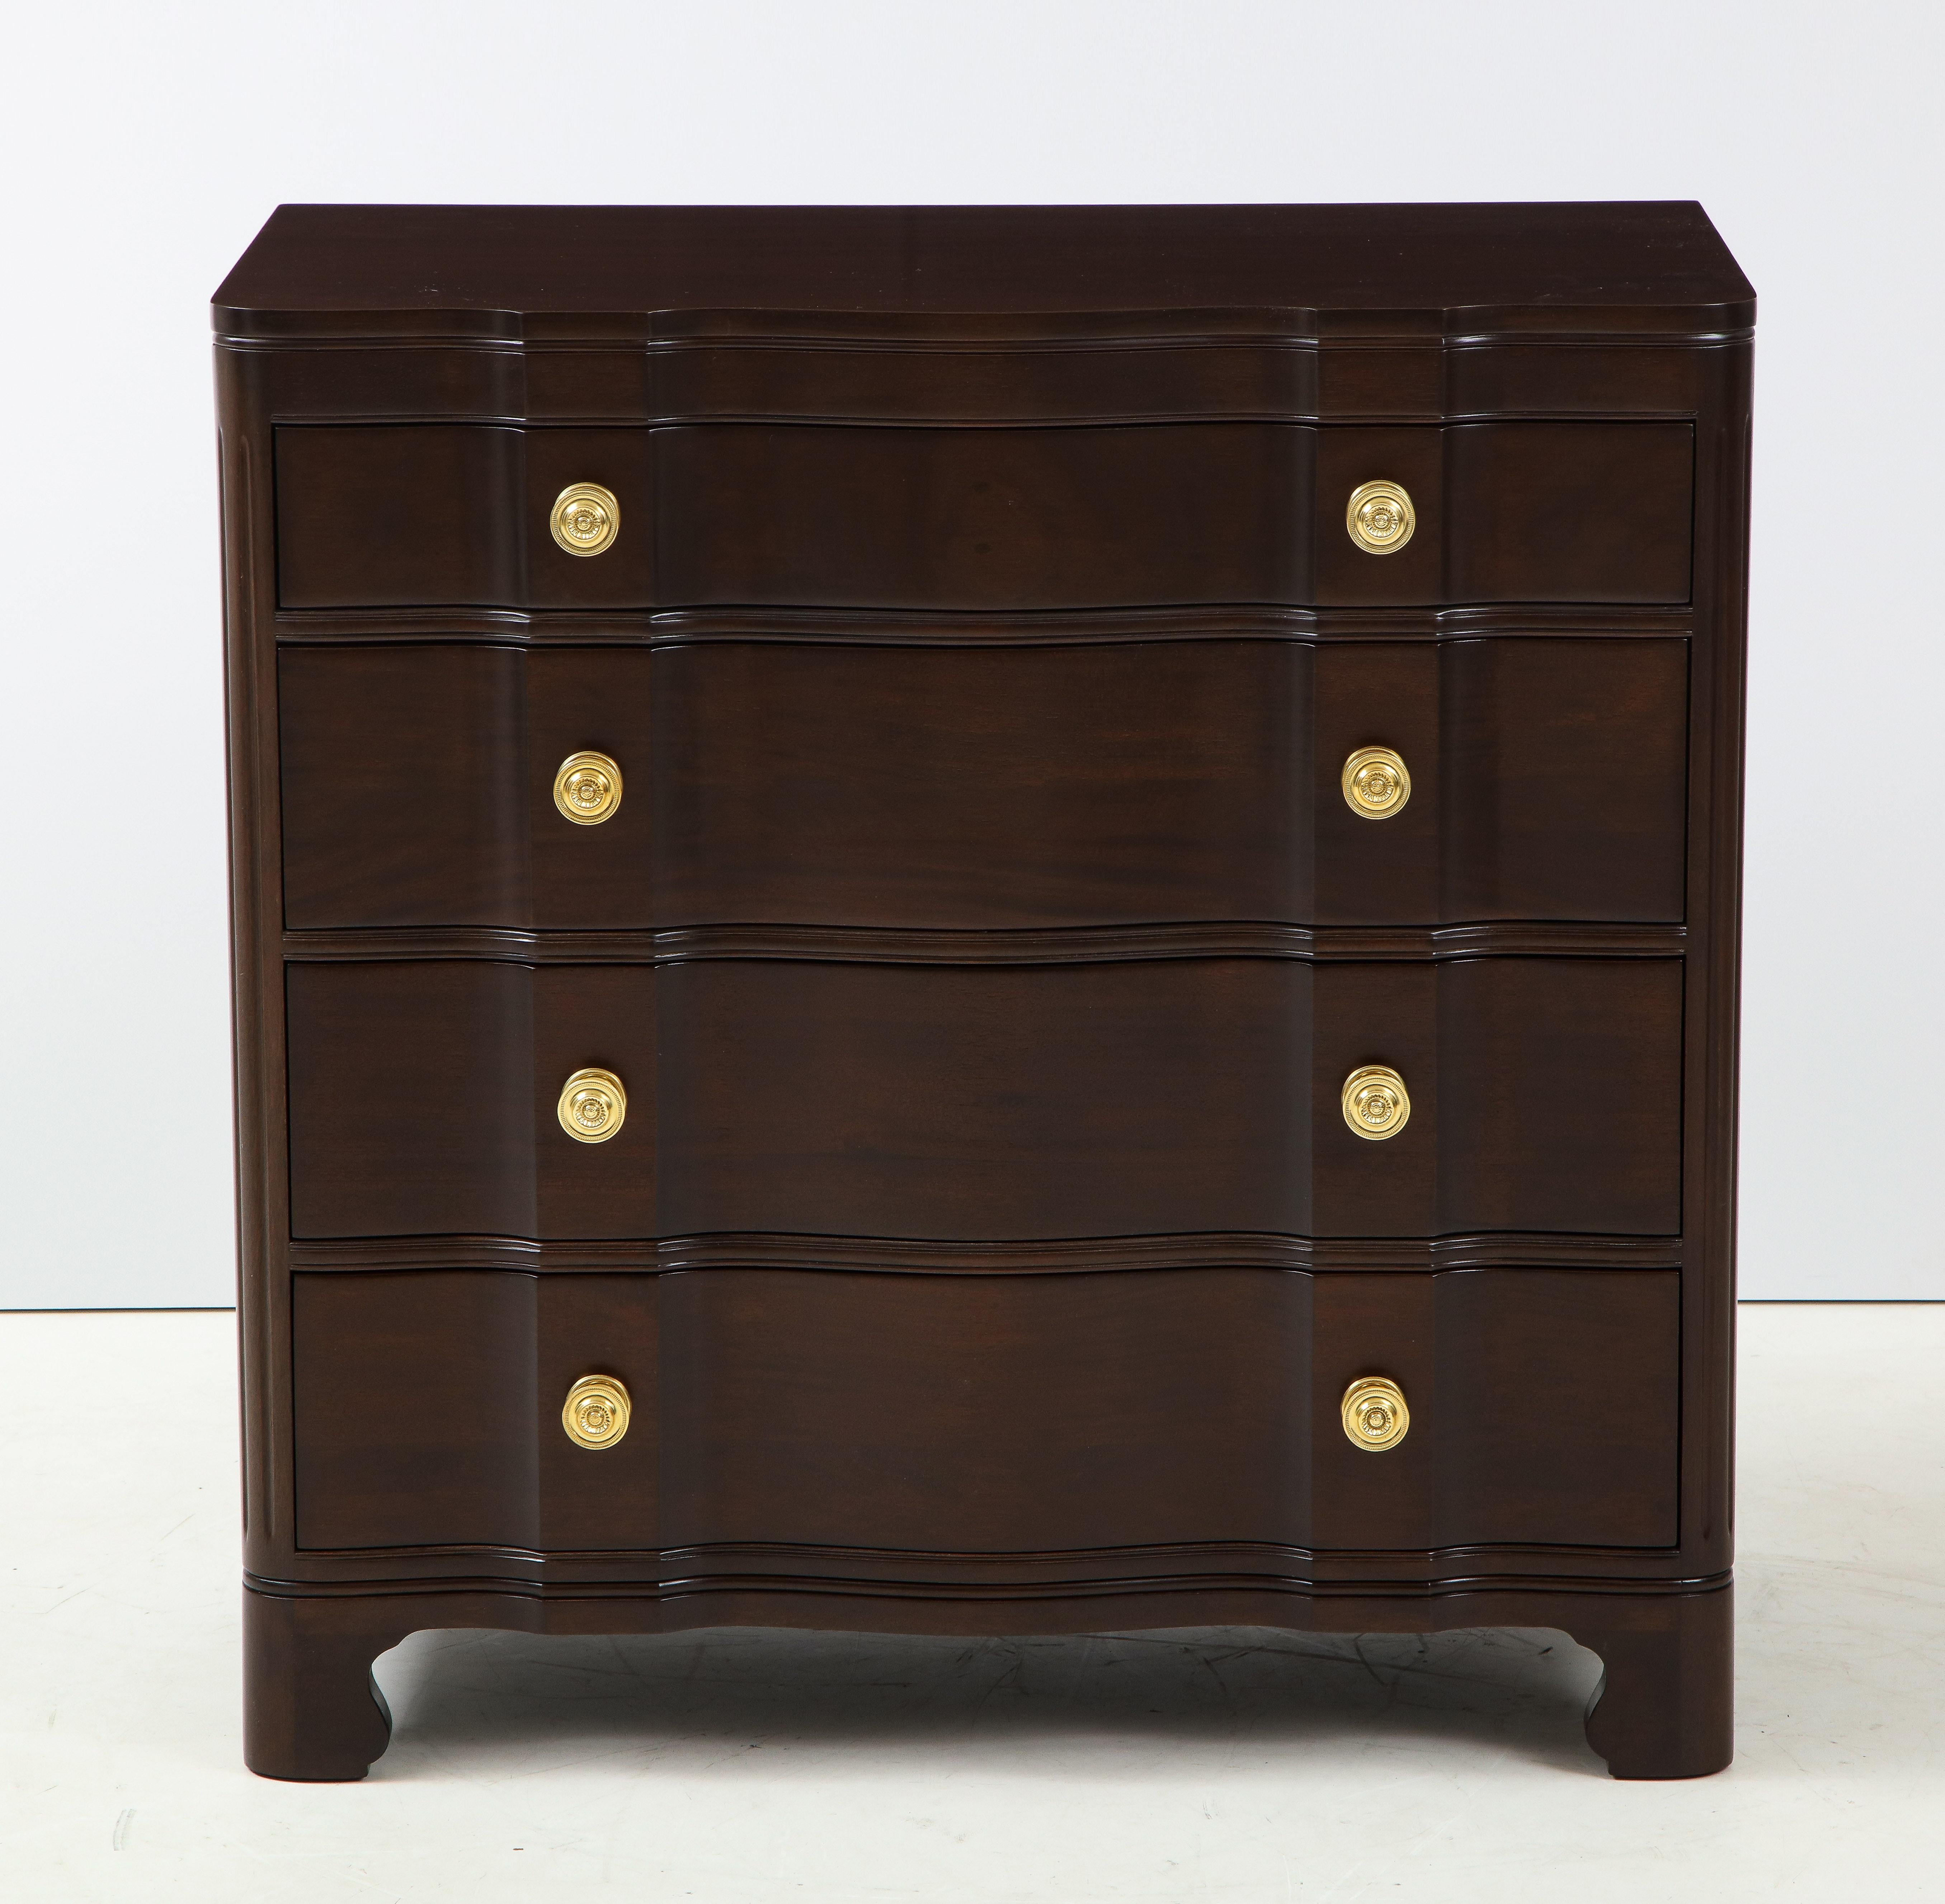 Elegant pair of neoclassical meets midcentury mahogany chest of drawers with a sinuous front and featuring 4 ample drawers each with detailed brass pulls. Restored with a satin finish. Signed.